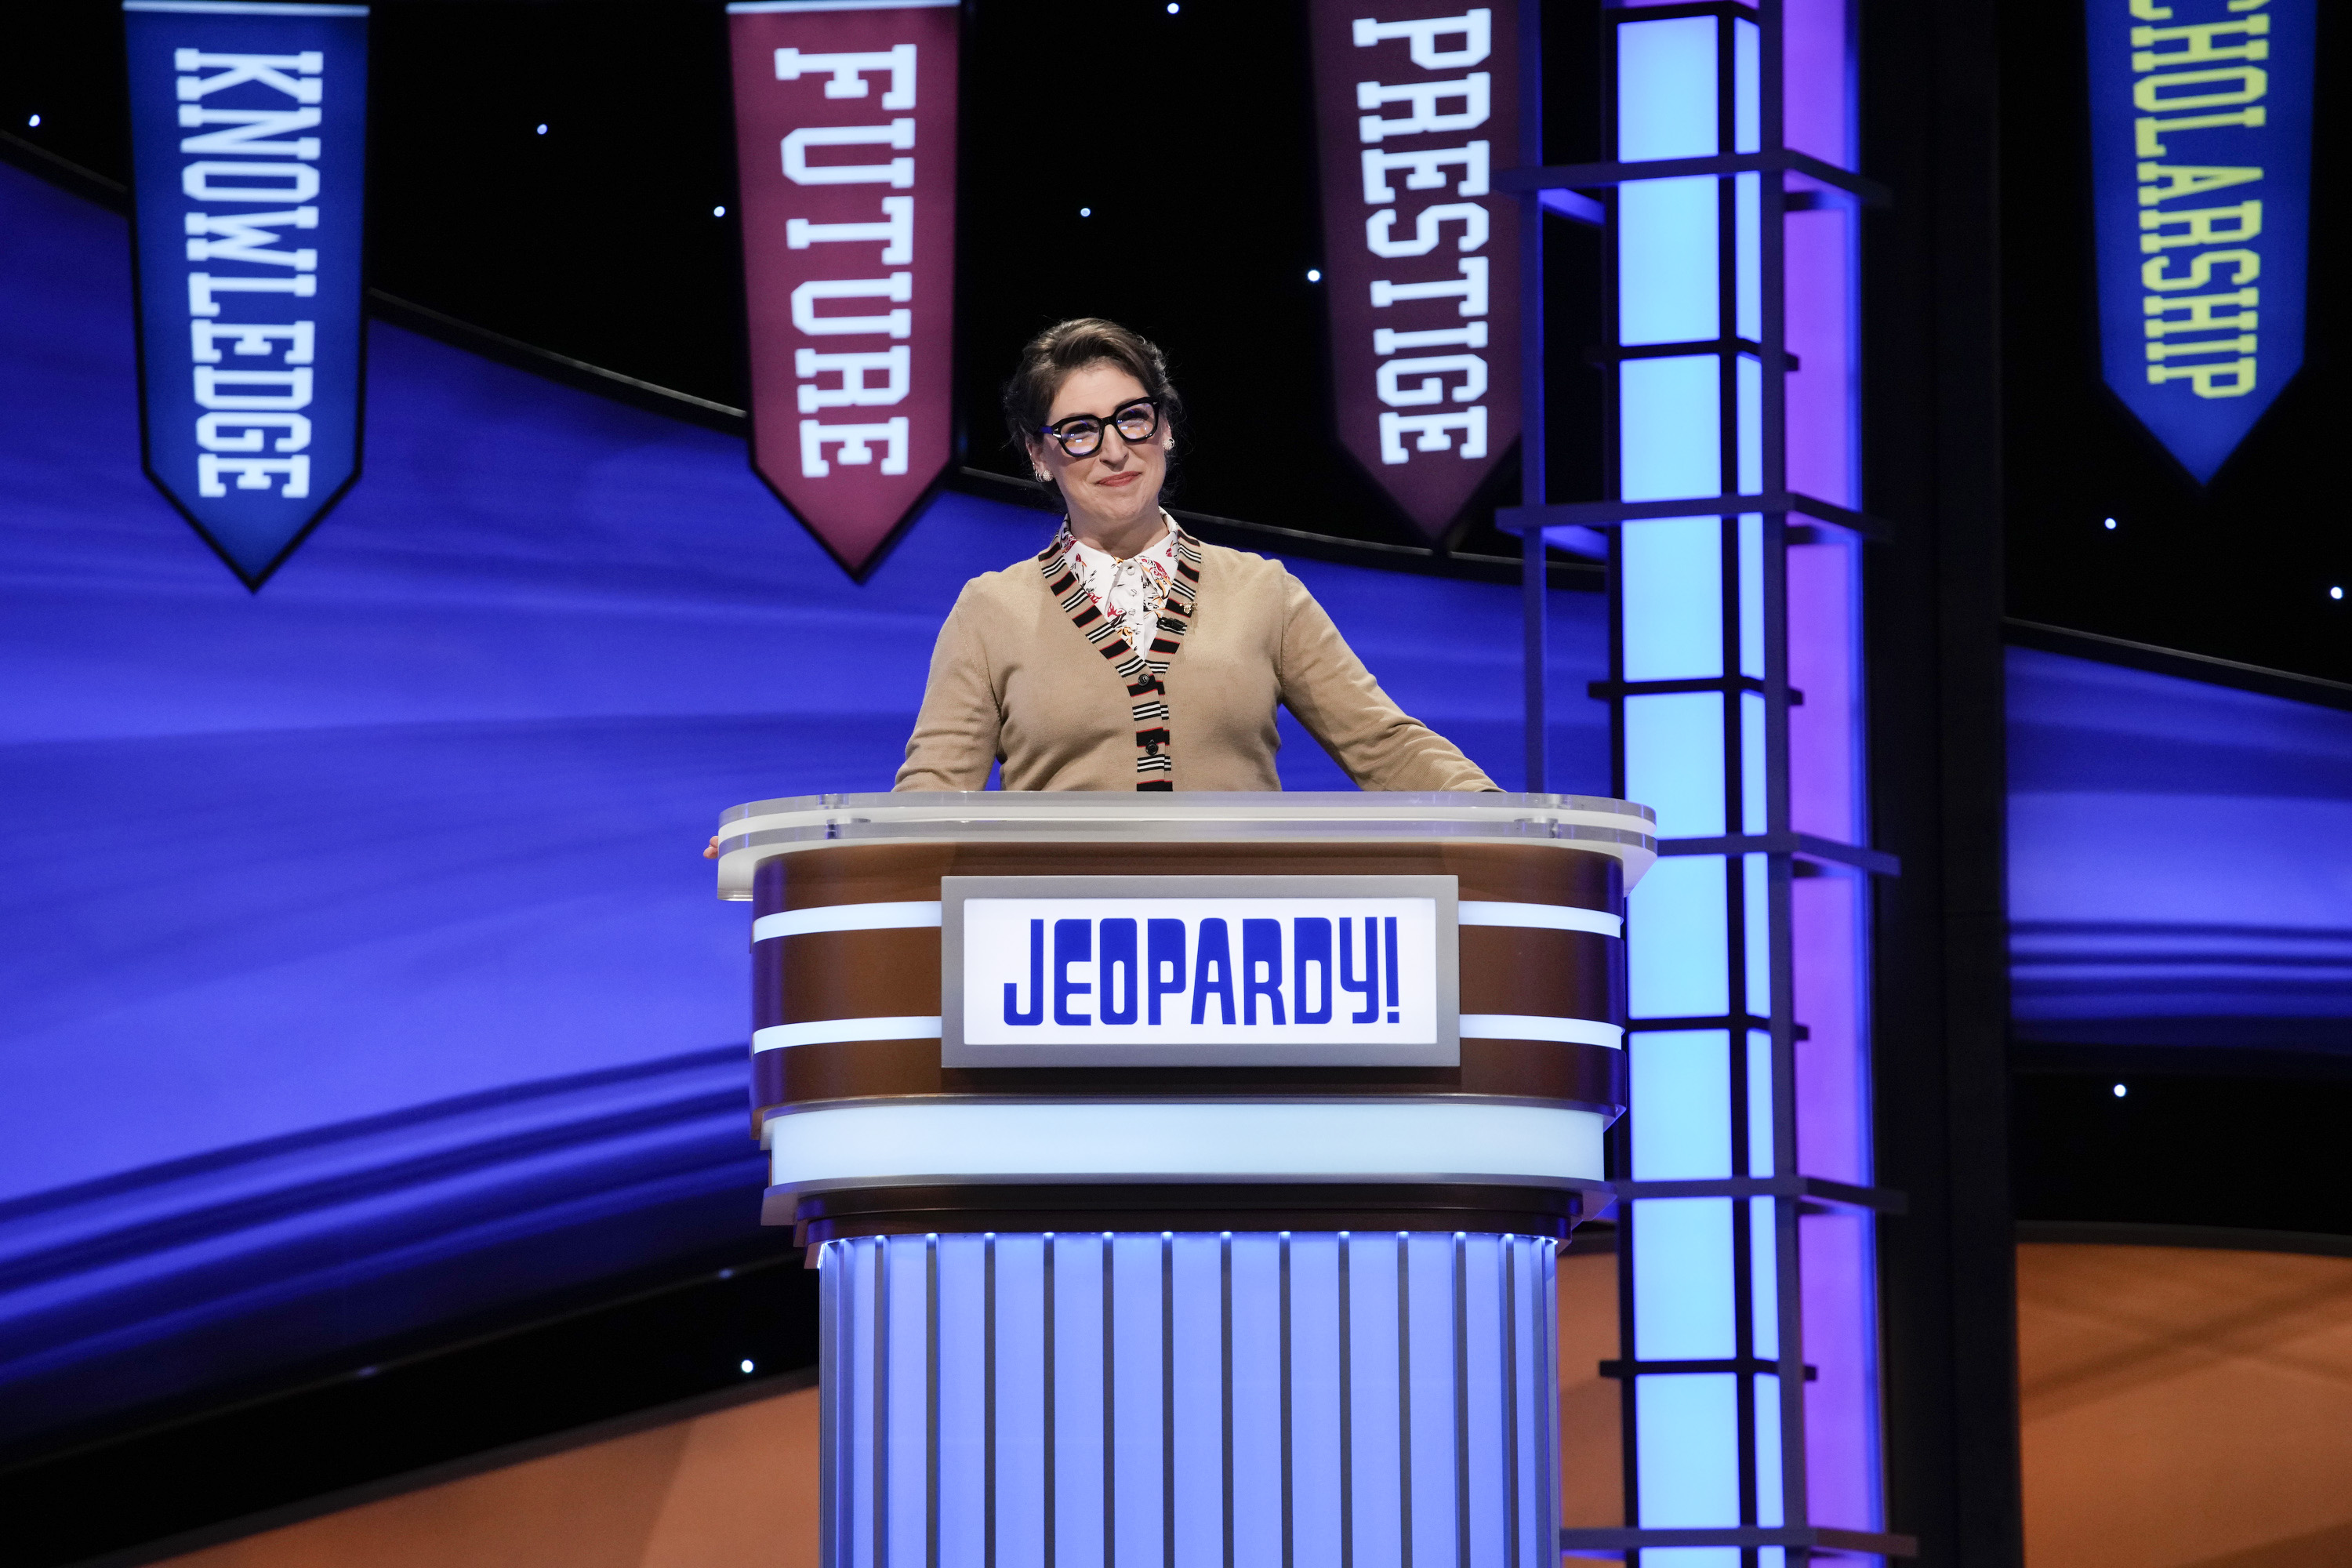 'Jeopardy!' host Mayim Bialik wears a brown sweater and glasses at the lectern for the show's National College Championship tournament.